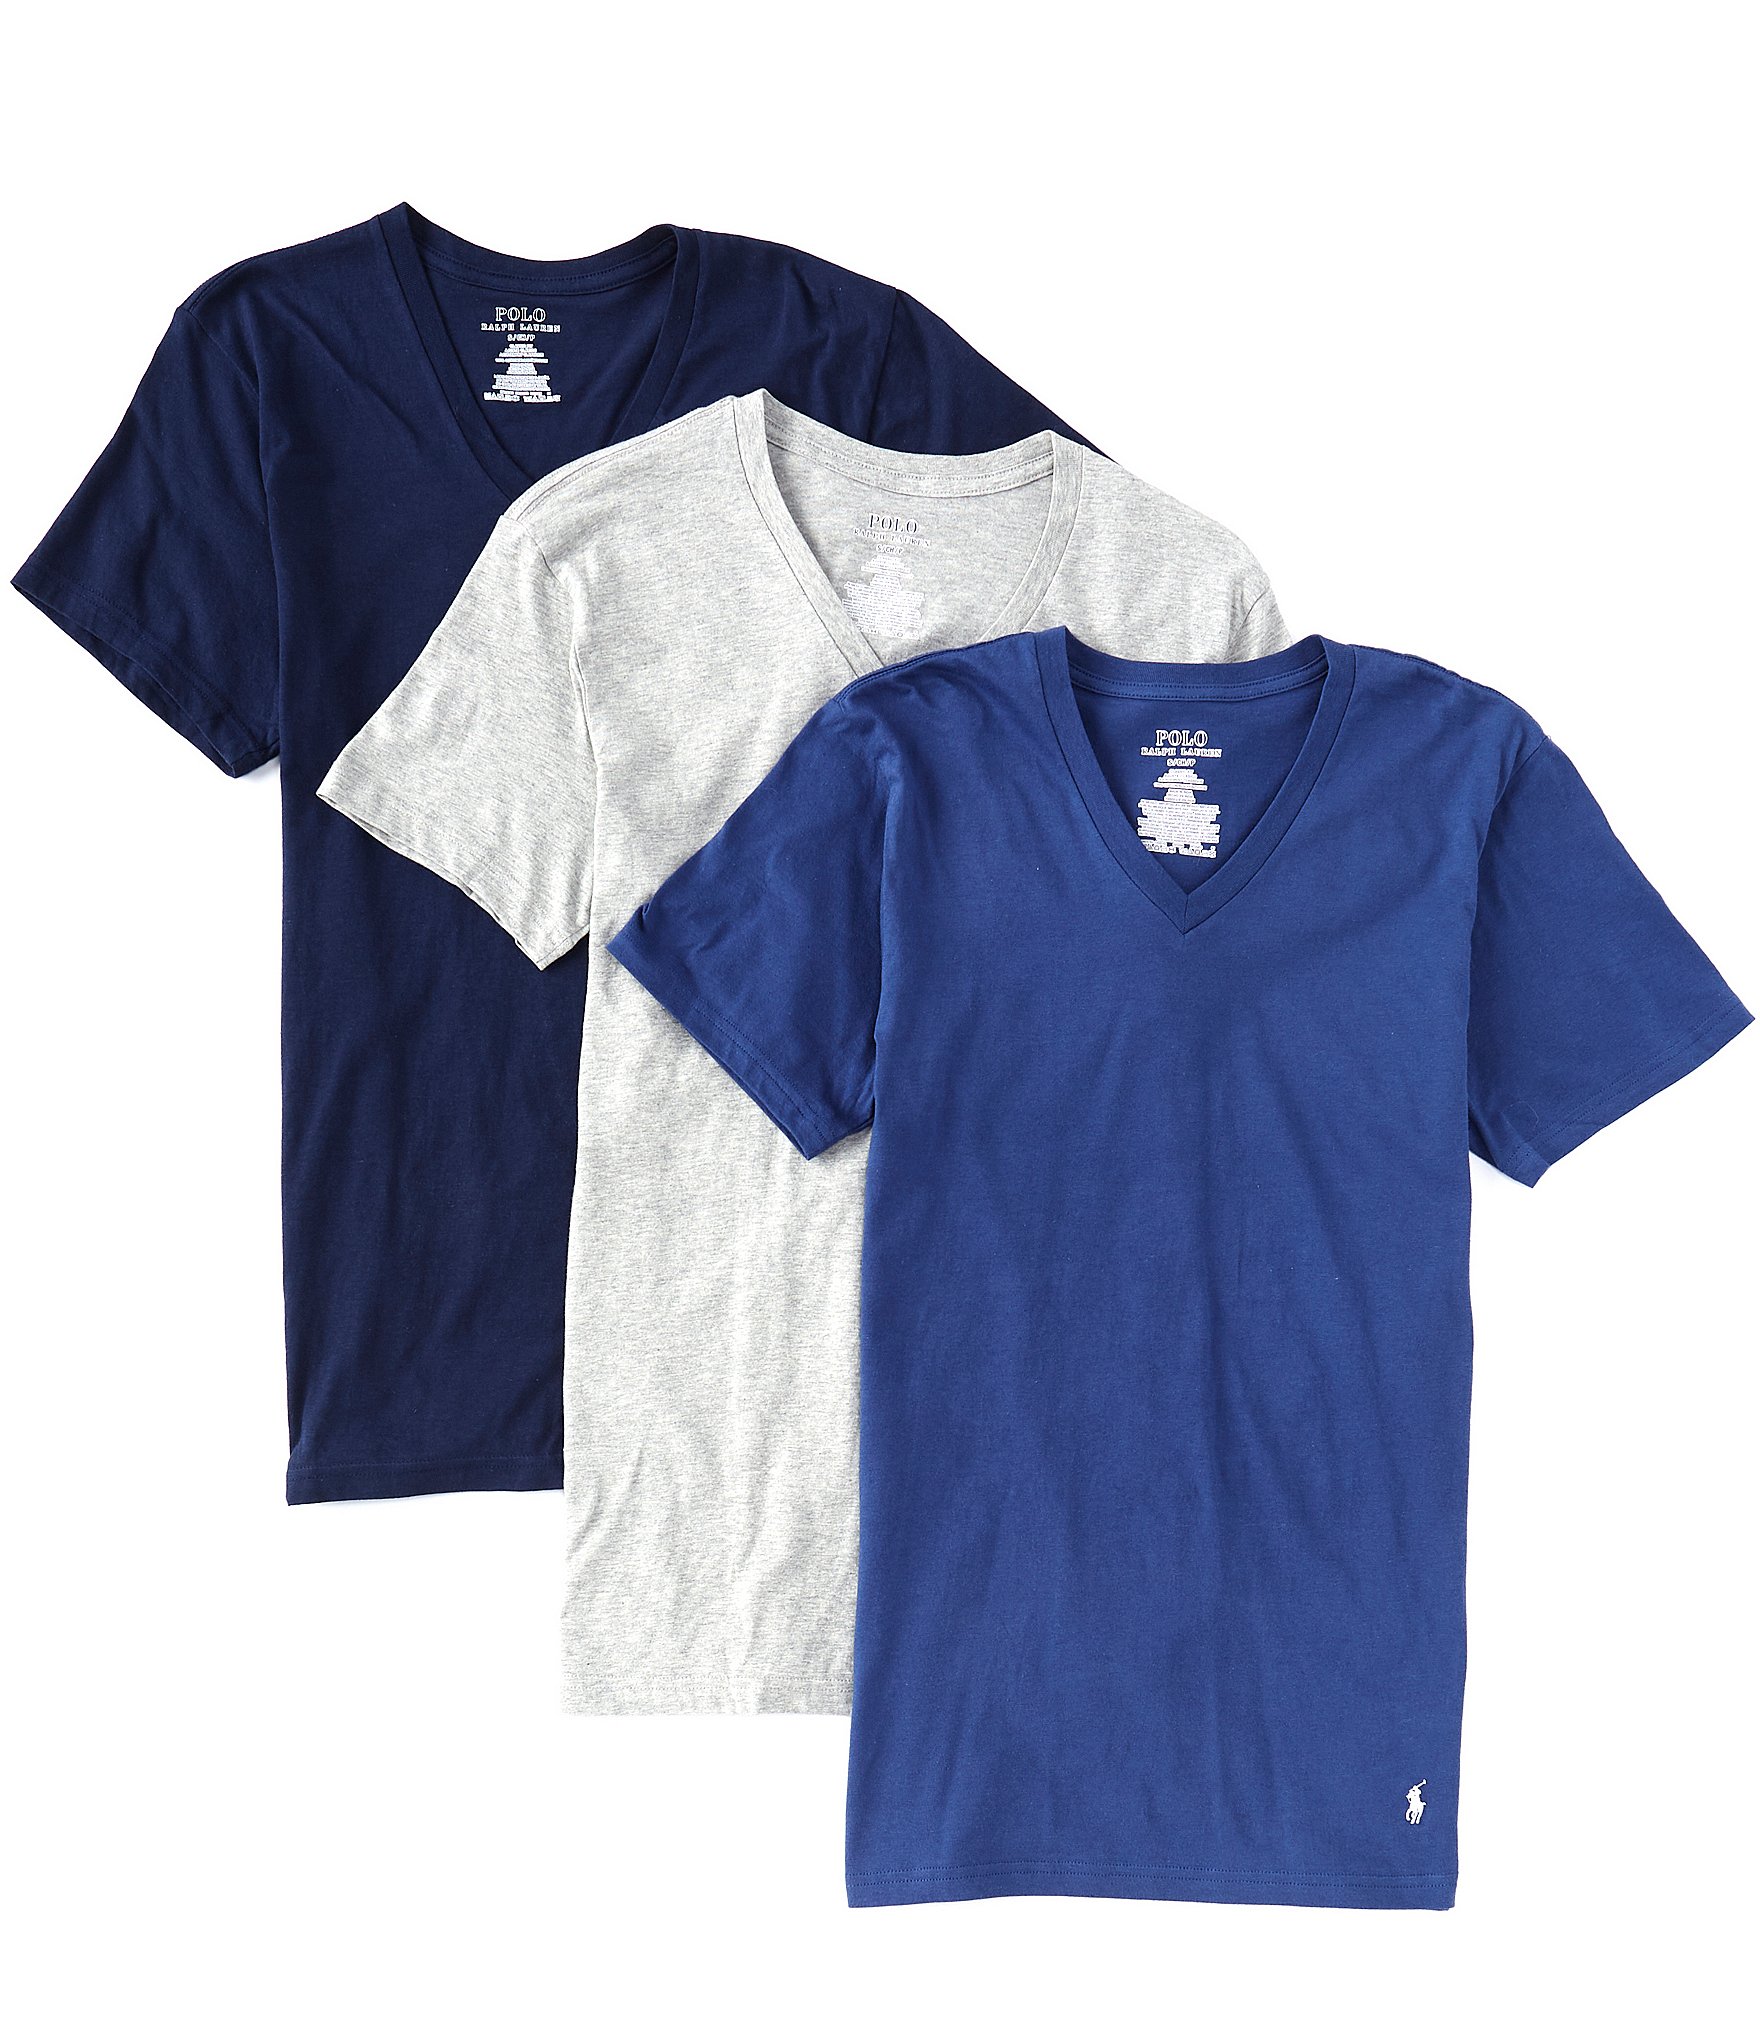 Polo Ralph Lauren Big & Tall Classic Fit V-Neck T-Shirts 3-Pack